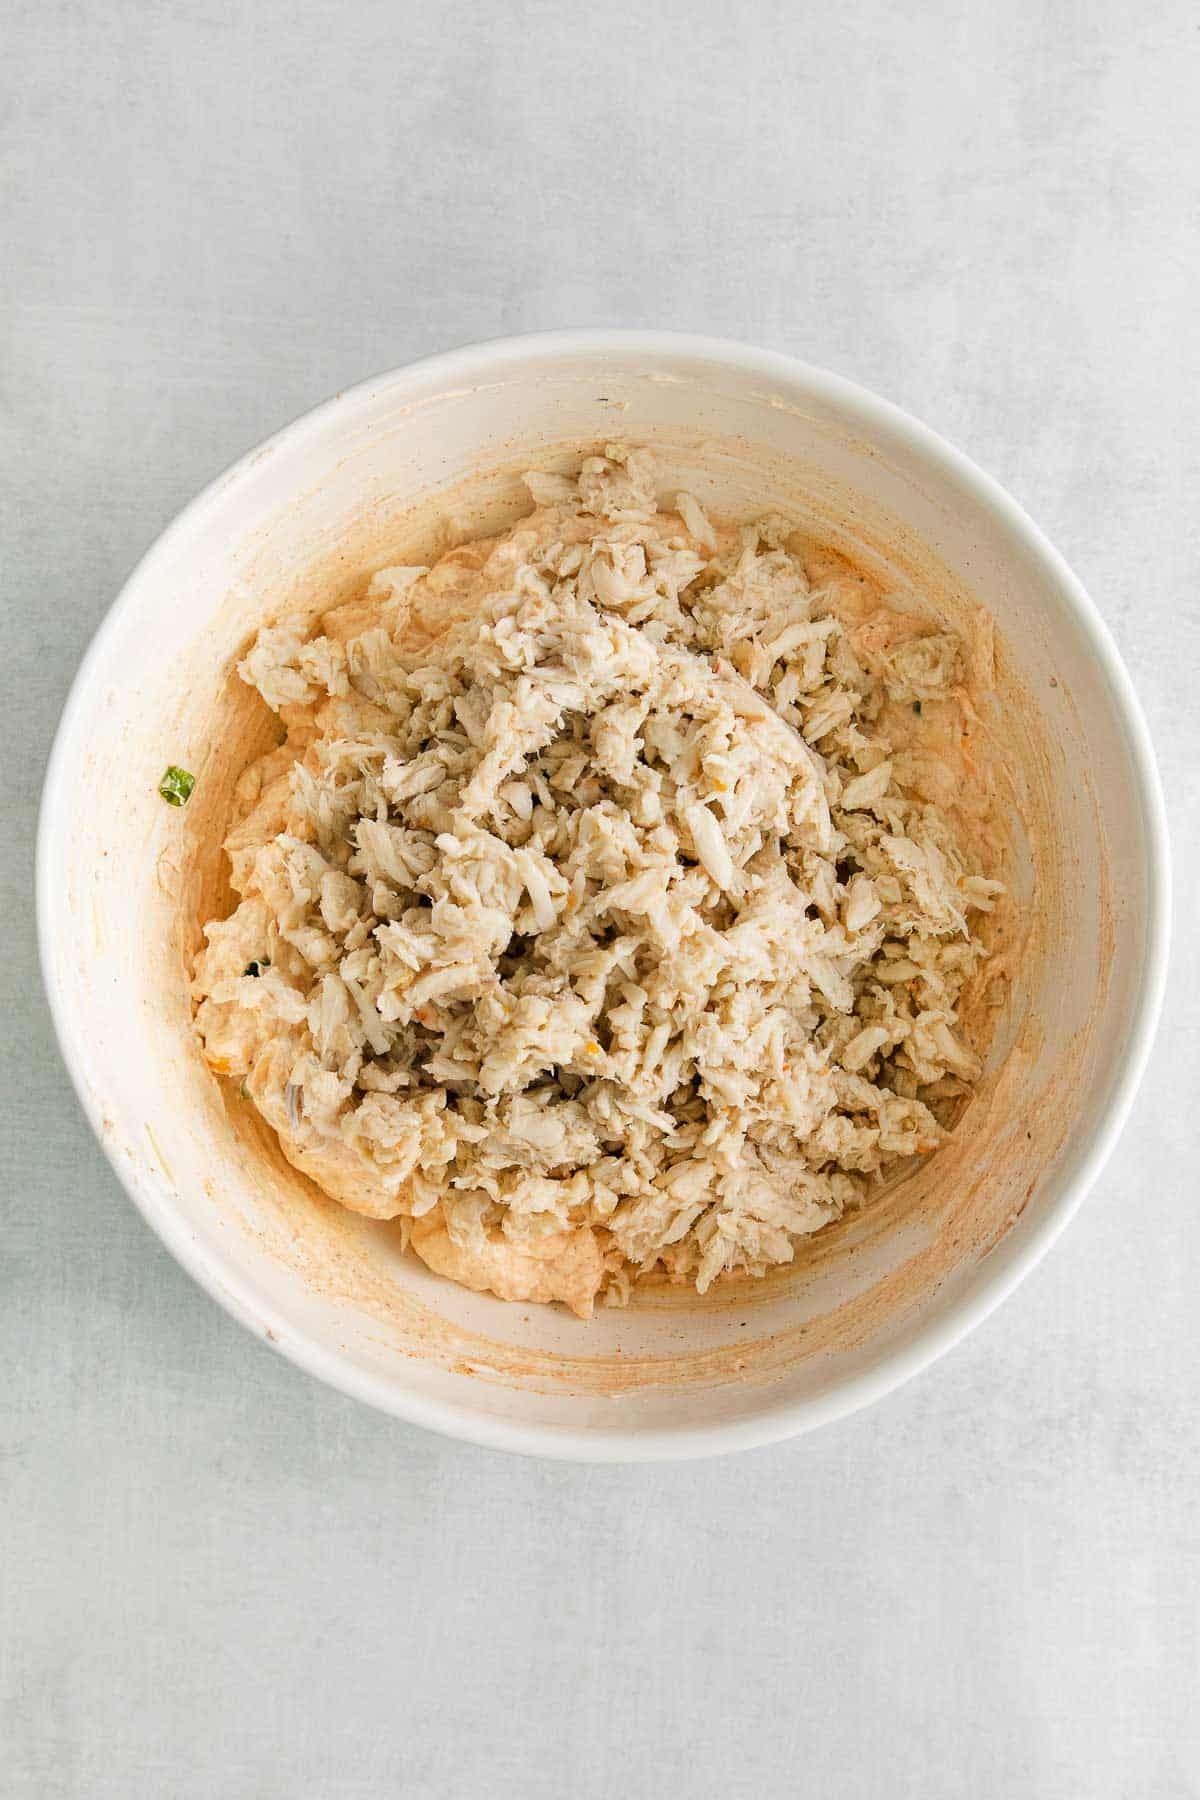 white bowl with raw lump crab meat over cream cheese and cheese mixture.